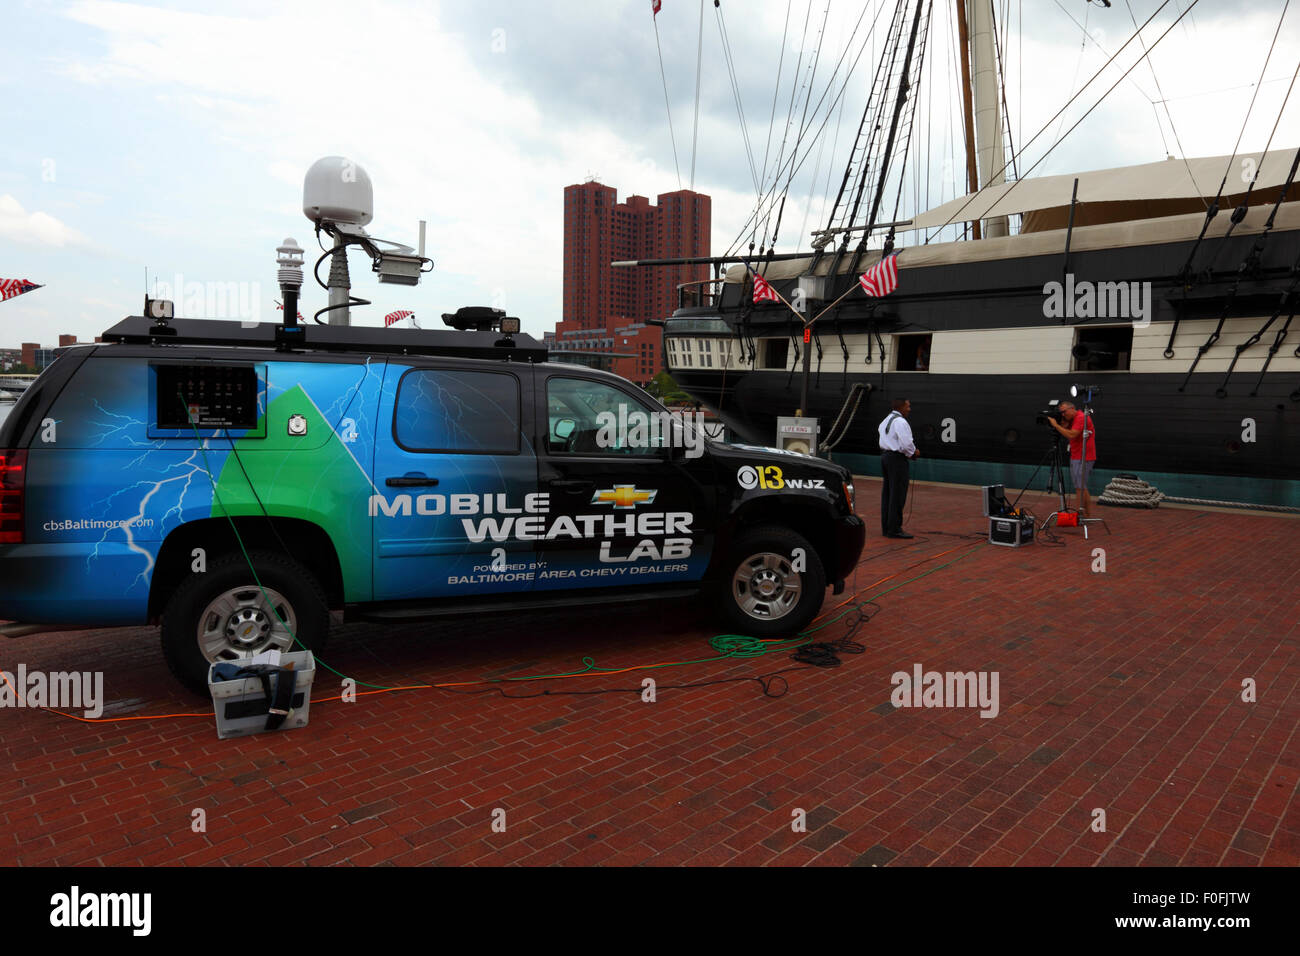 Mobile weather lab vehicle and reporter next to USS Constellation, Inner Harbor, Baltimore City, Maryland, USA Stock Photo